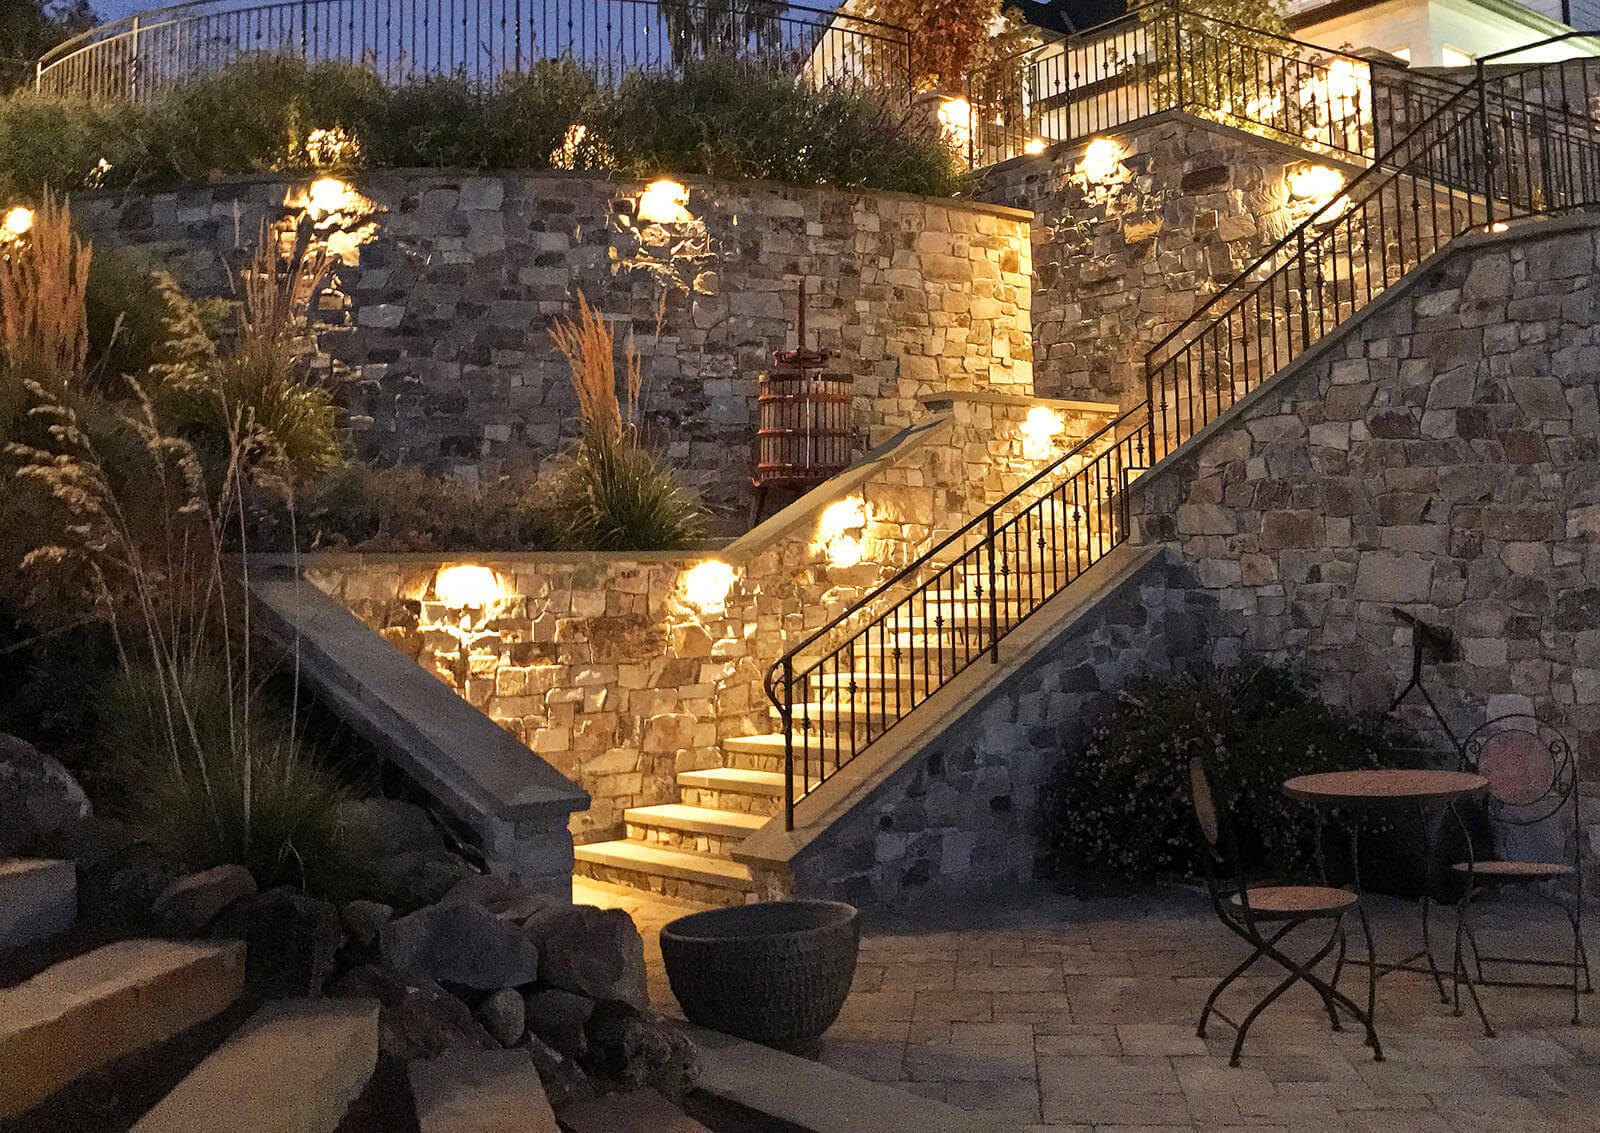 Accent lighting on edge of upper wall, with well-lit warm lighting on stairs leading from bottom deck to house